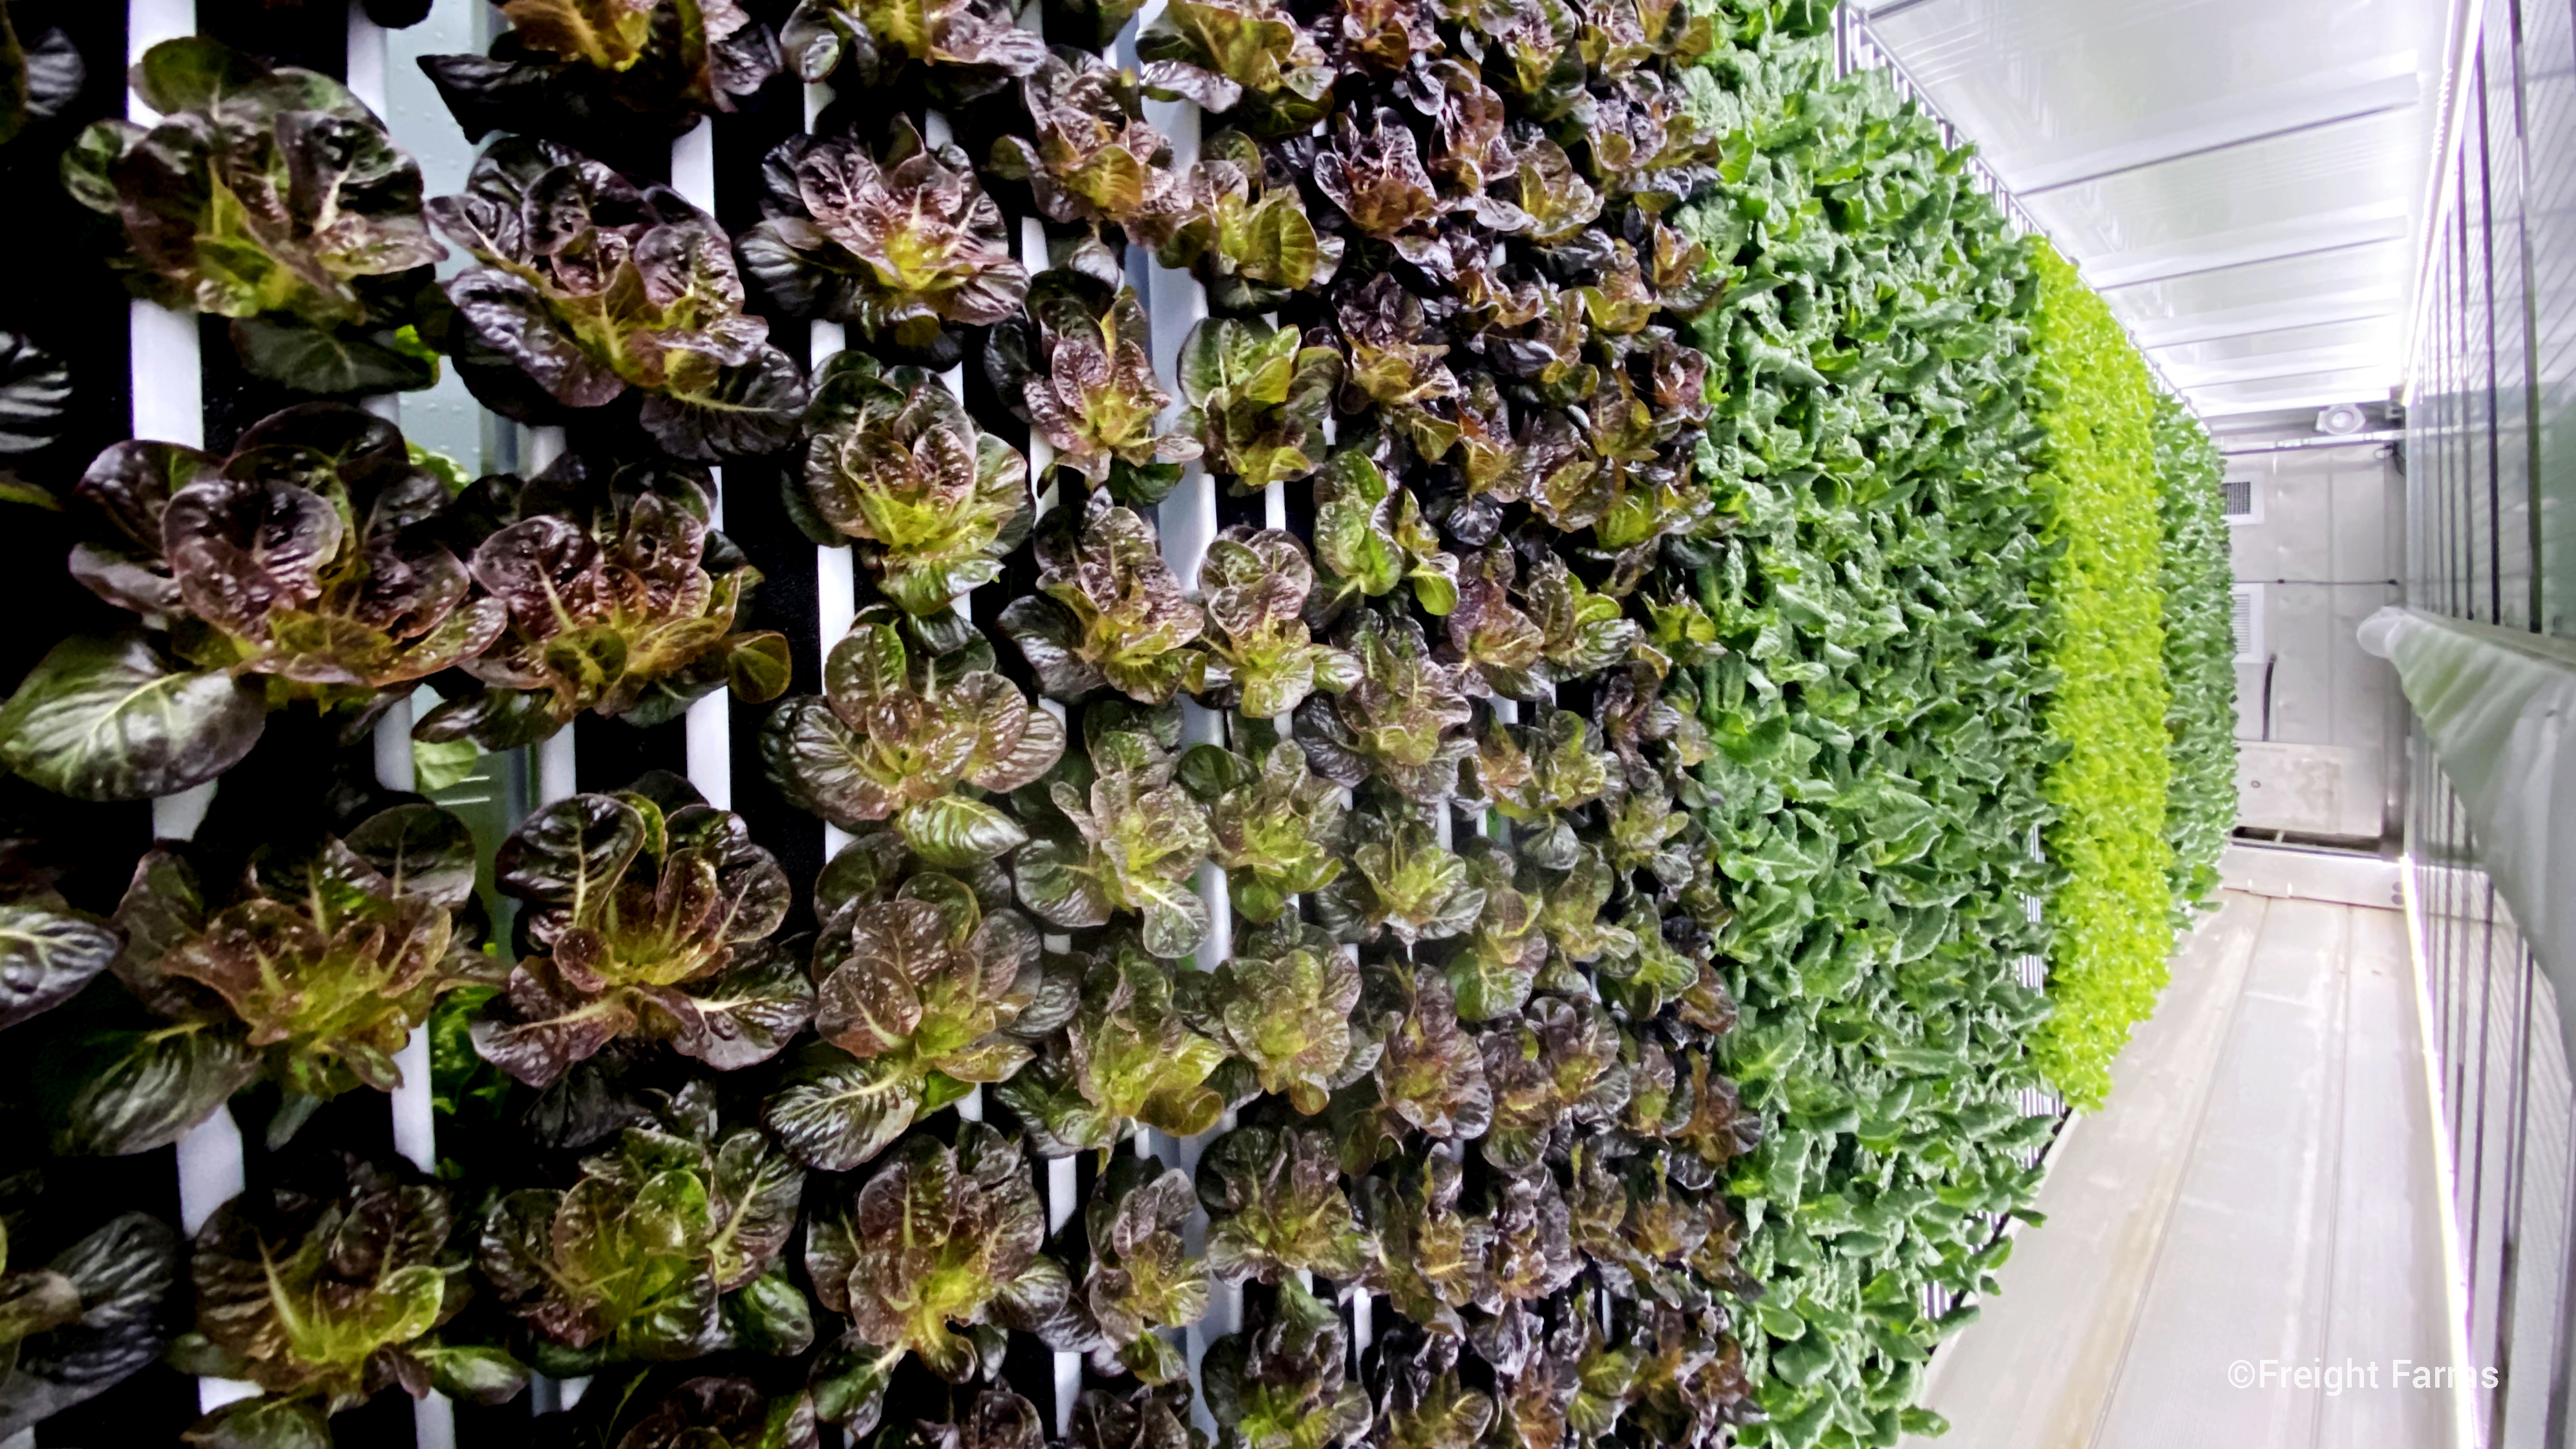 Freight Farms is turning shipping containers into hydroponic farms.